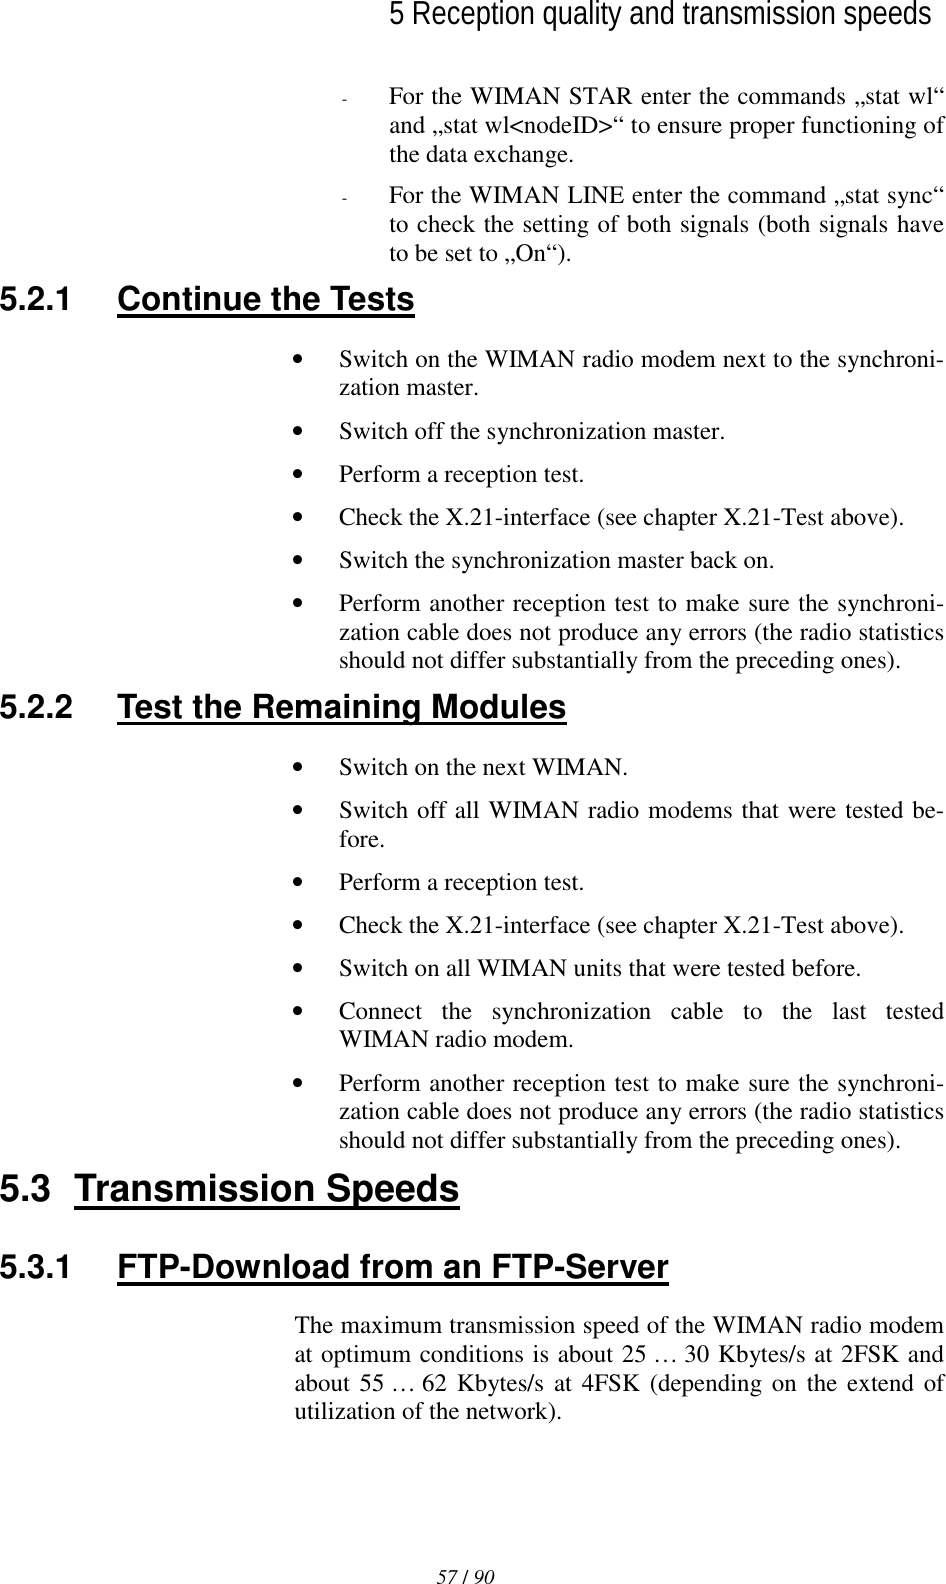   5 Reception quality and transmission speeds 57 / 90l-  For the WIMAN STAR enter the commands „stat wl“ and „stat wl&lt;nodeID&gt;“ to ensure proper functioning of the data exchange. -  For the WIMAN LINE enter the command „stat sync“ to check the setting of both signals (both signals have to be set to „On“). 5.2.1  Continue the Tests •  Switch on the WIMAN radio modem next to the synchroni-zation master. •  Switch off the synchronization master. •  Perform a reception test. •  Check the X.21-interface (see chapter X.21-Test above). •  Switch the synchronization master back on. •  Perform another reception test to make sure the synchroni-zation cable does not produce any errors (the radio statistics should not differ substantially from the preceding ones). 5.2.2  Test the Remaining Modules •  Switch on the next WIMAN. •  Switch off all WIMAN radio modems that were tested be-fore. •  Perform a reception test. •  Check the X.21-interface (see chapter X.21-Test above). •  Switch on all WIMAN units that were tested before. •  Connect the synchronization cable to the last tested WIMAN radio modem. •  Perform another reception test to make sure the synchroni-zation cable does not produce any errors (the radio statistics should not differ substantially from the preceding ones). 5.3 Transmission Speeds 5.3.1  FTP-Download from an FTP-Server The maximum transmission speed of the WIMAN radio modem at optimum conditions is about 25 … 30 Kbytes/s at 2FSK and about 55 … 62 Kbytes/s at 4FSK (depending on the extend of utilization of the network). 